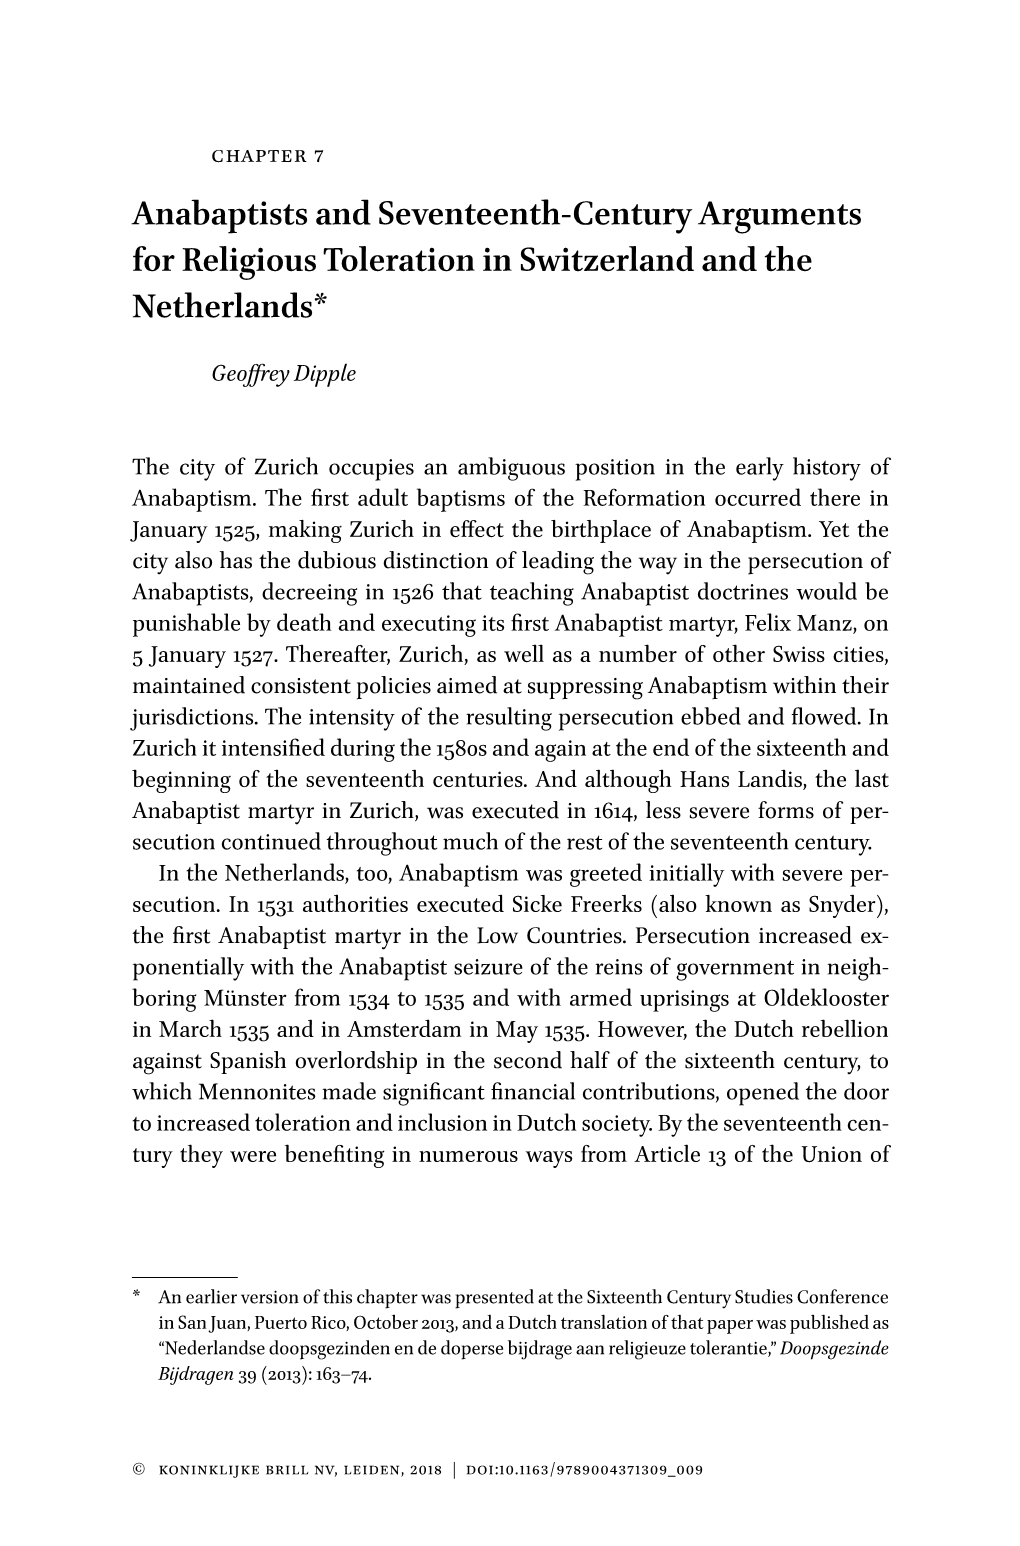 Anabaptists and Seventeenth-Century Arguments for Religious Toleration in Switzerland and the Netherlands*